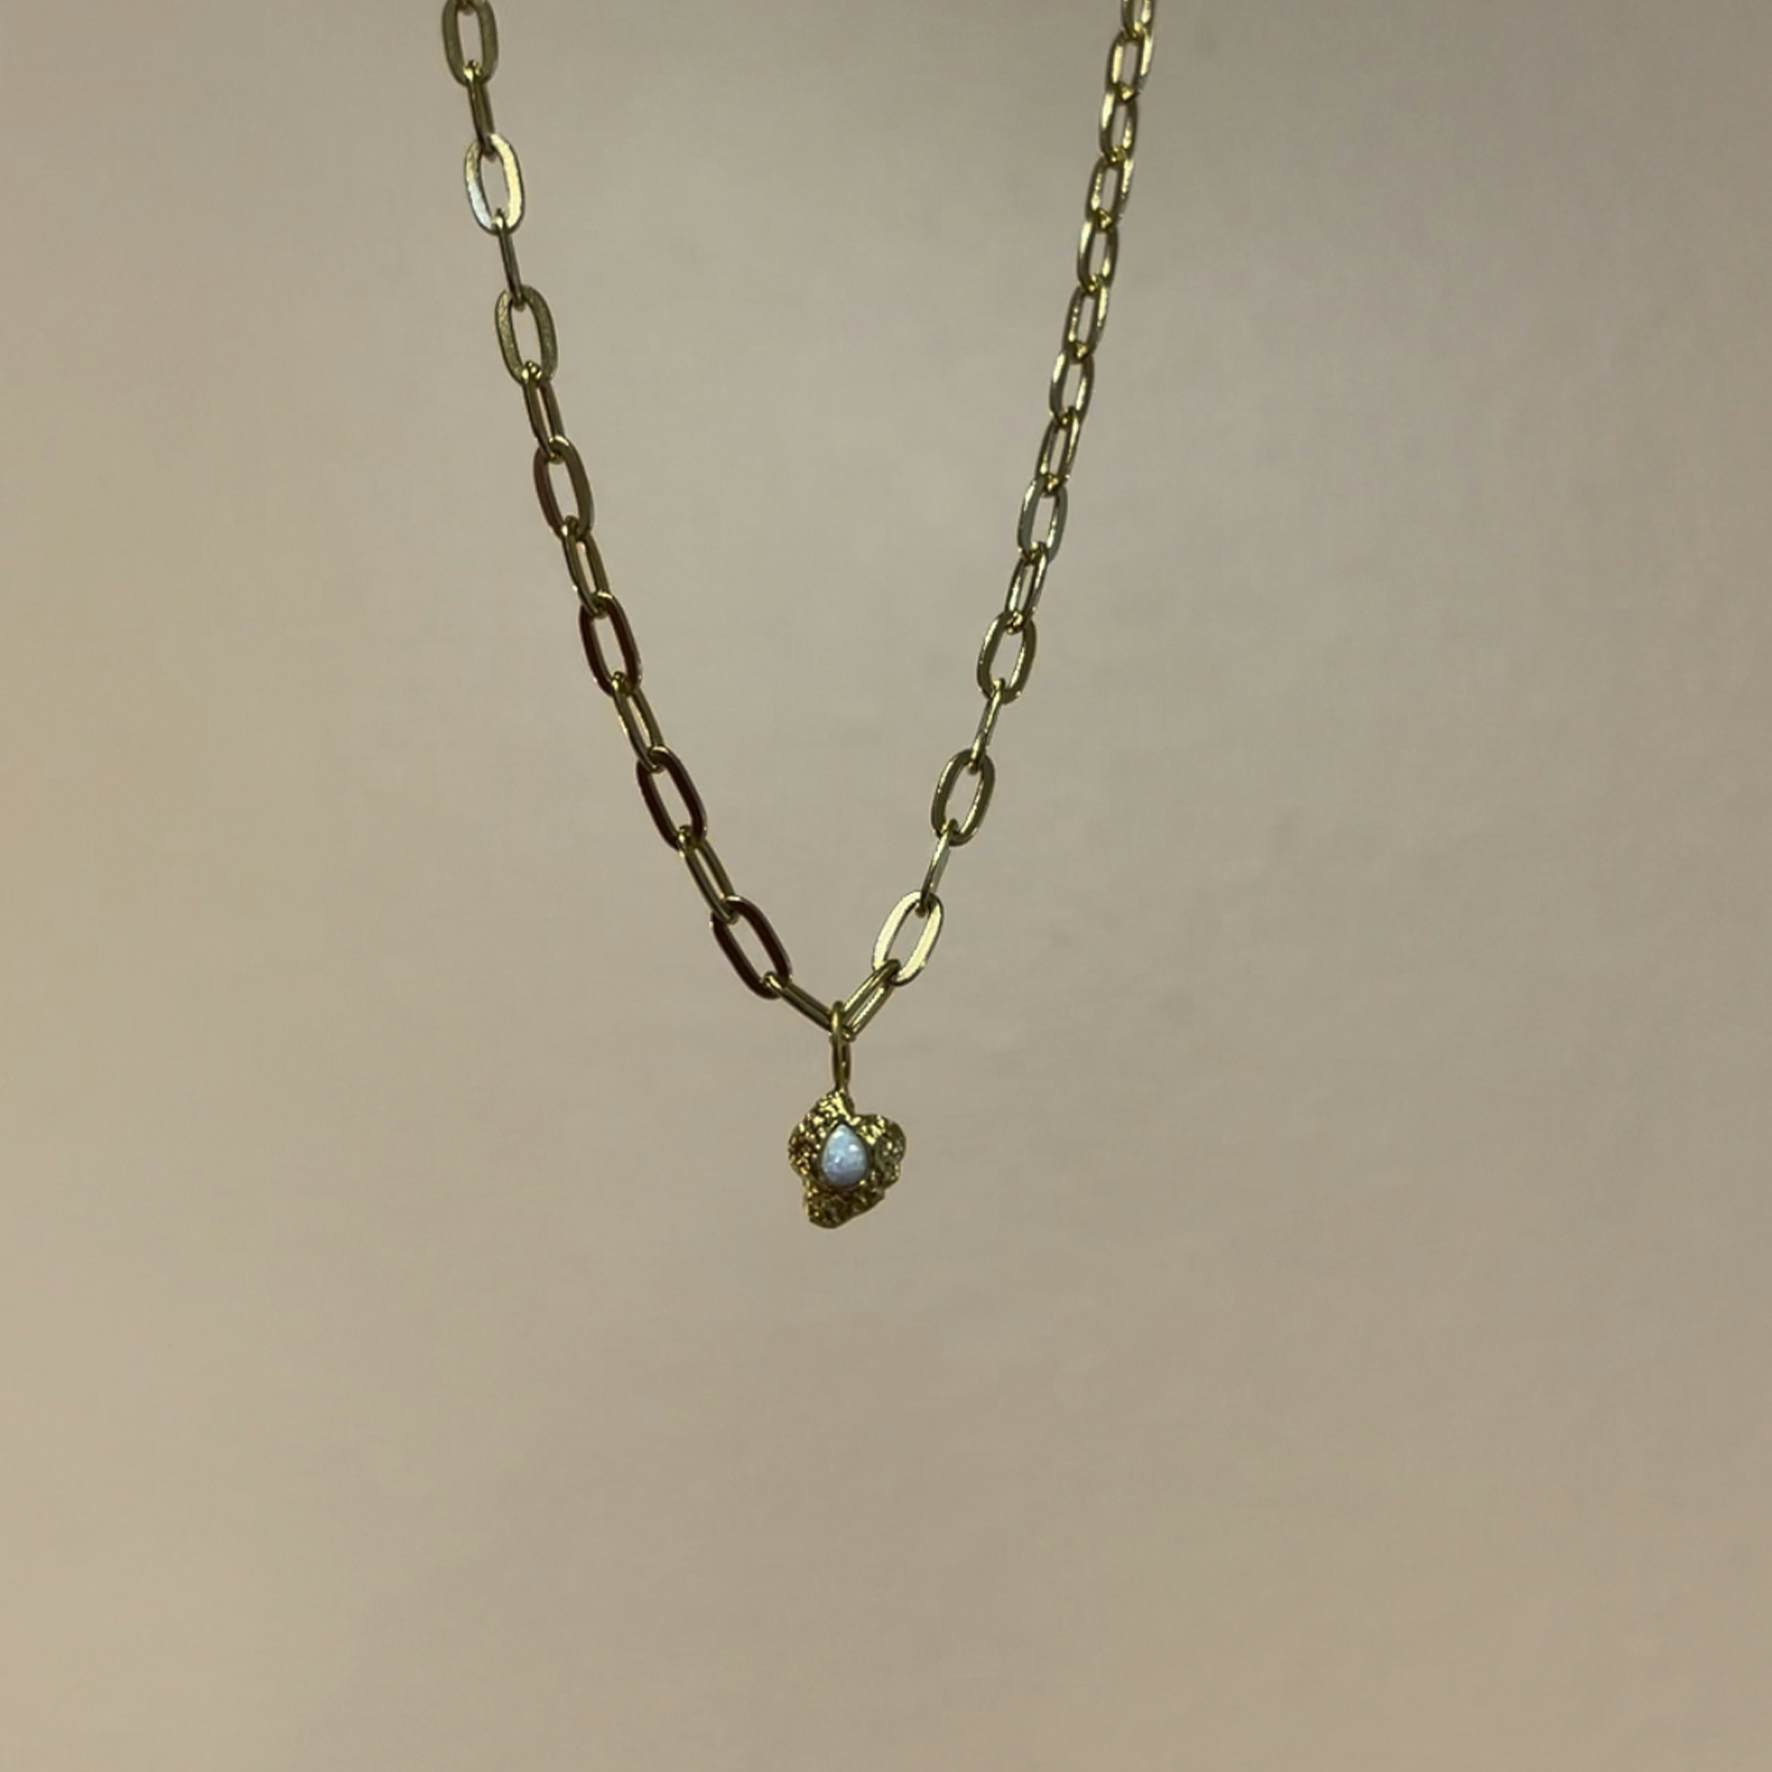 Chunky Pendant Chain from STINE A Jewelry in Goldplated-Silver Sterling 925